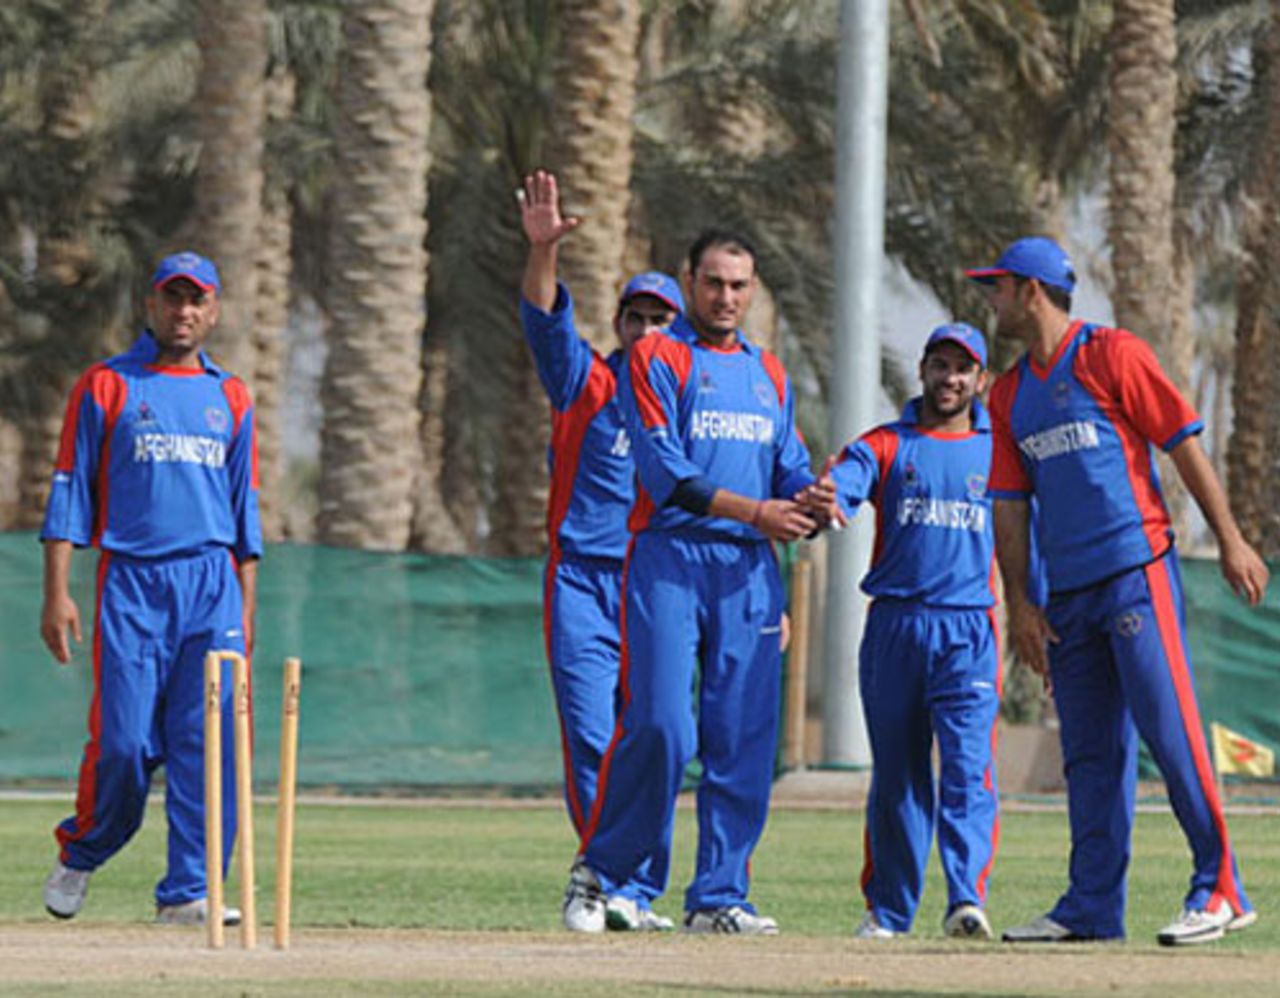 Afghanistan players celebrate a wicket on the opening day of the ACC Twenty20 Cup in the UAE, November 23, 2009